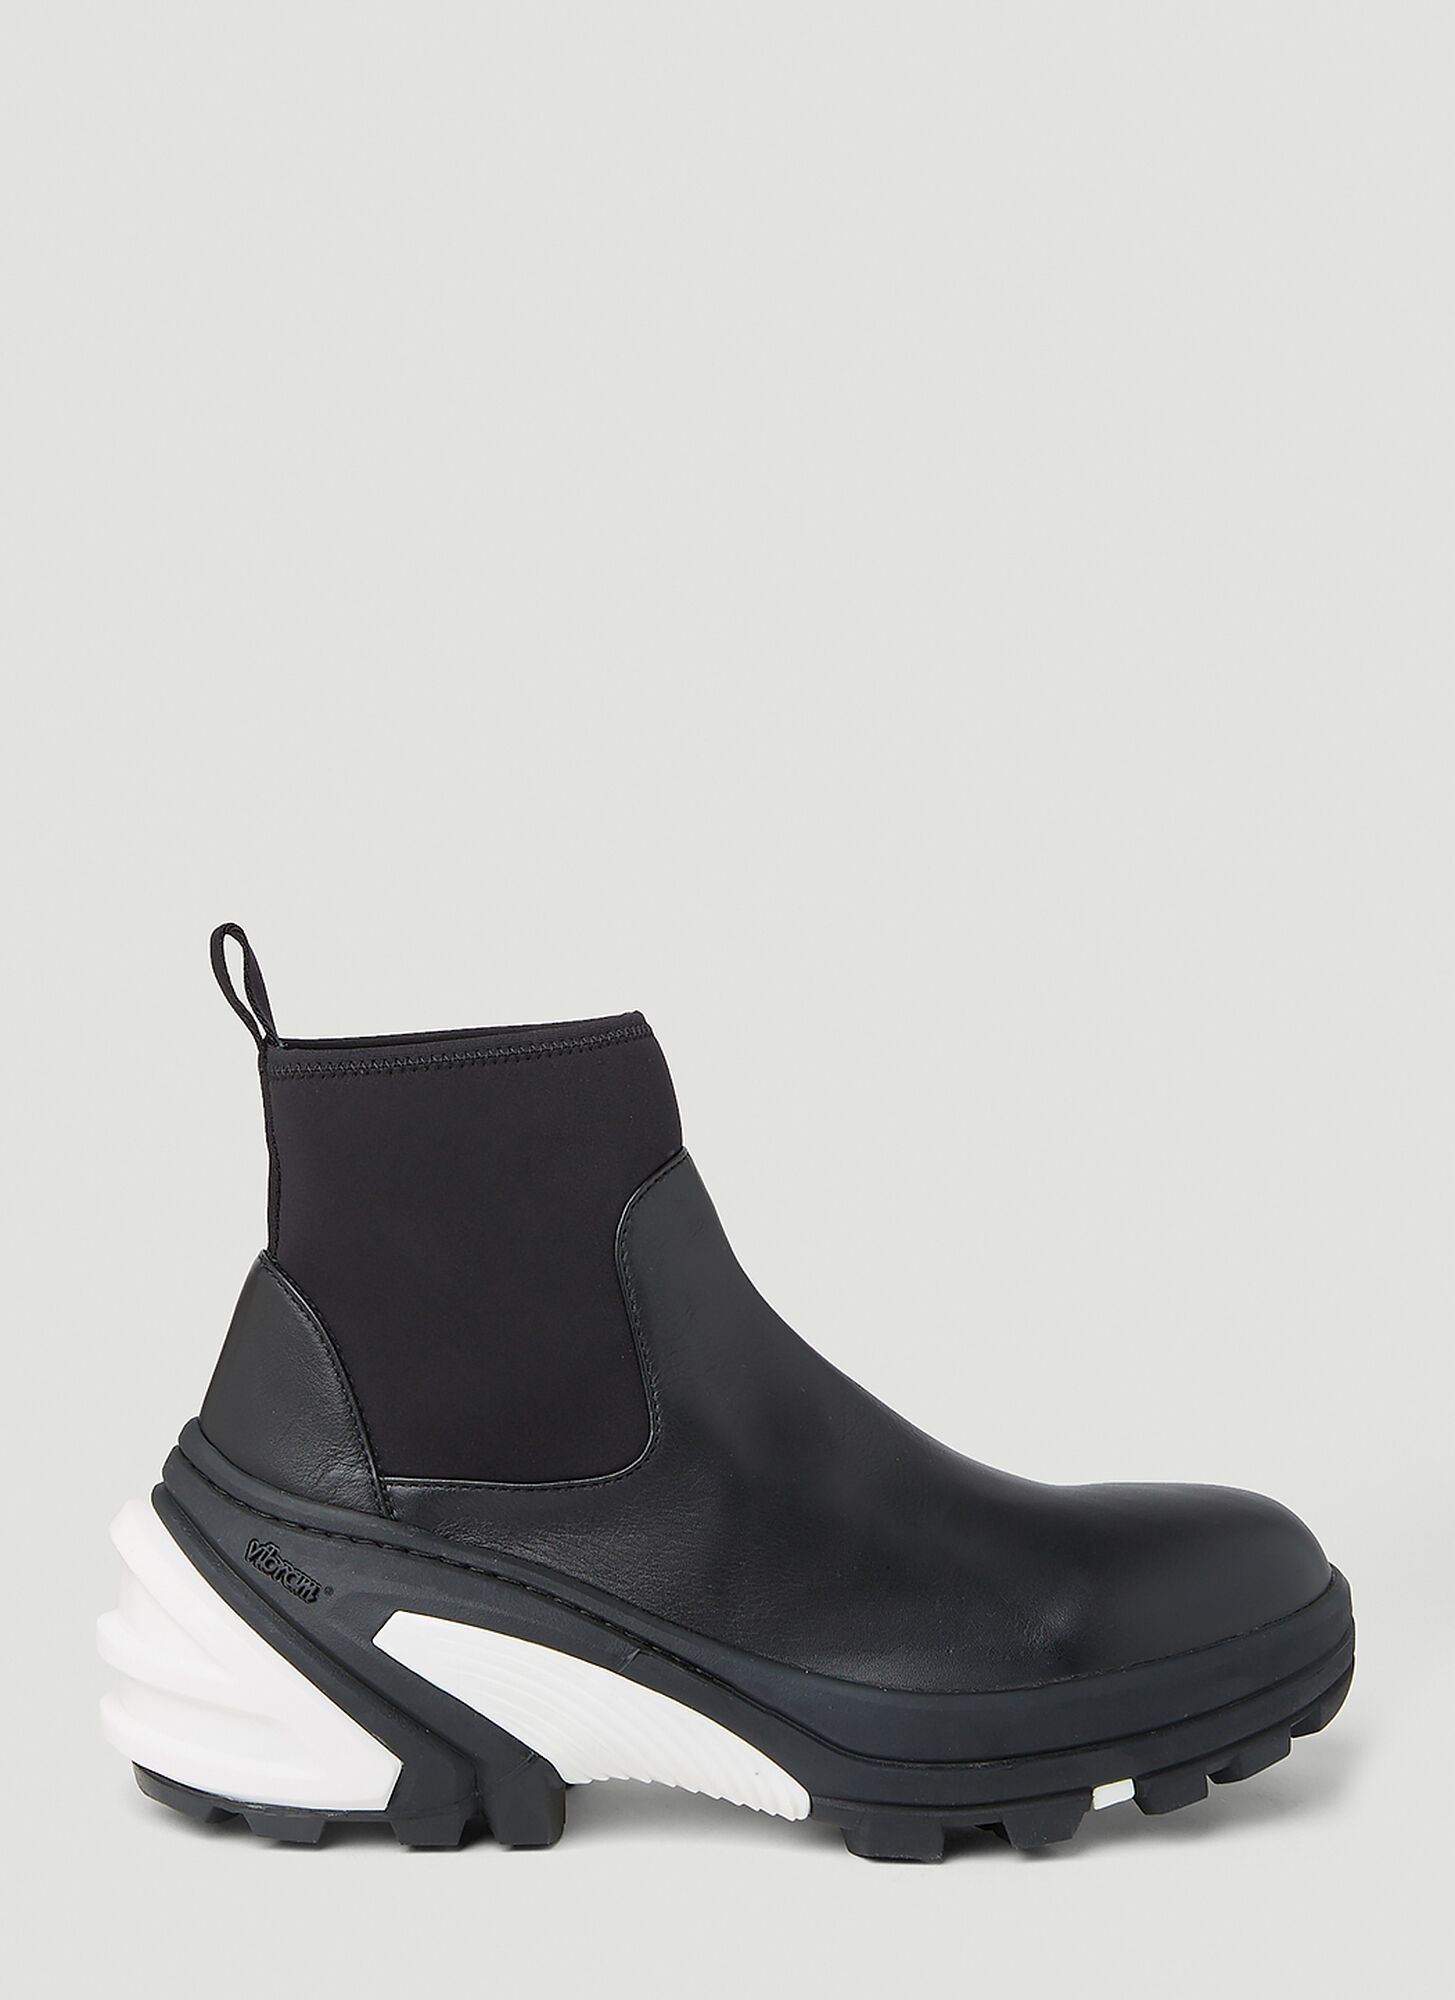 Shop Alyx Skx Ankle Boots